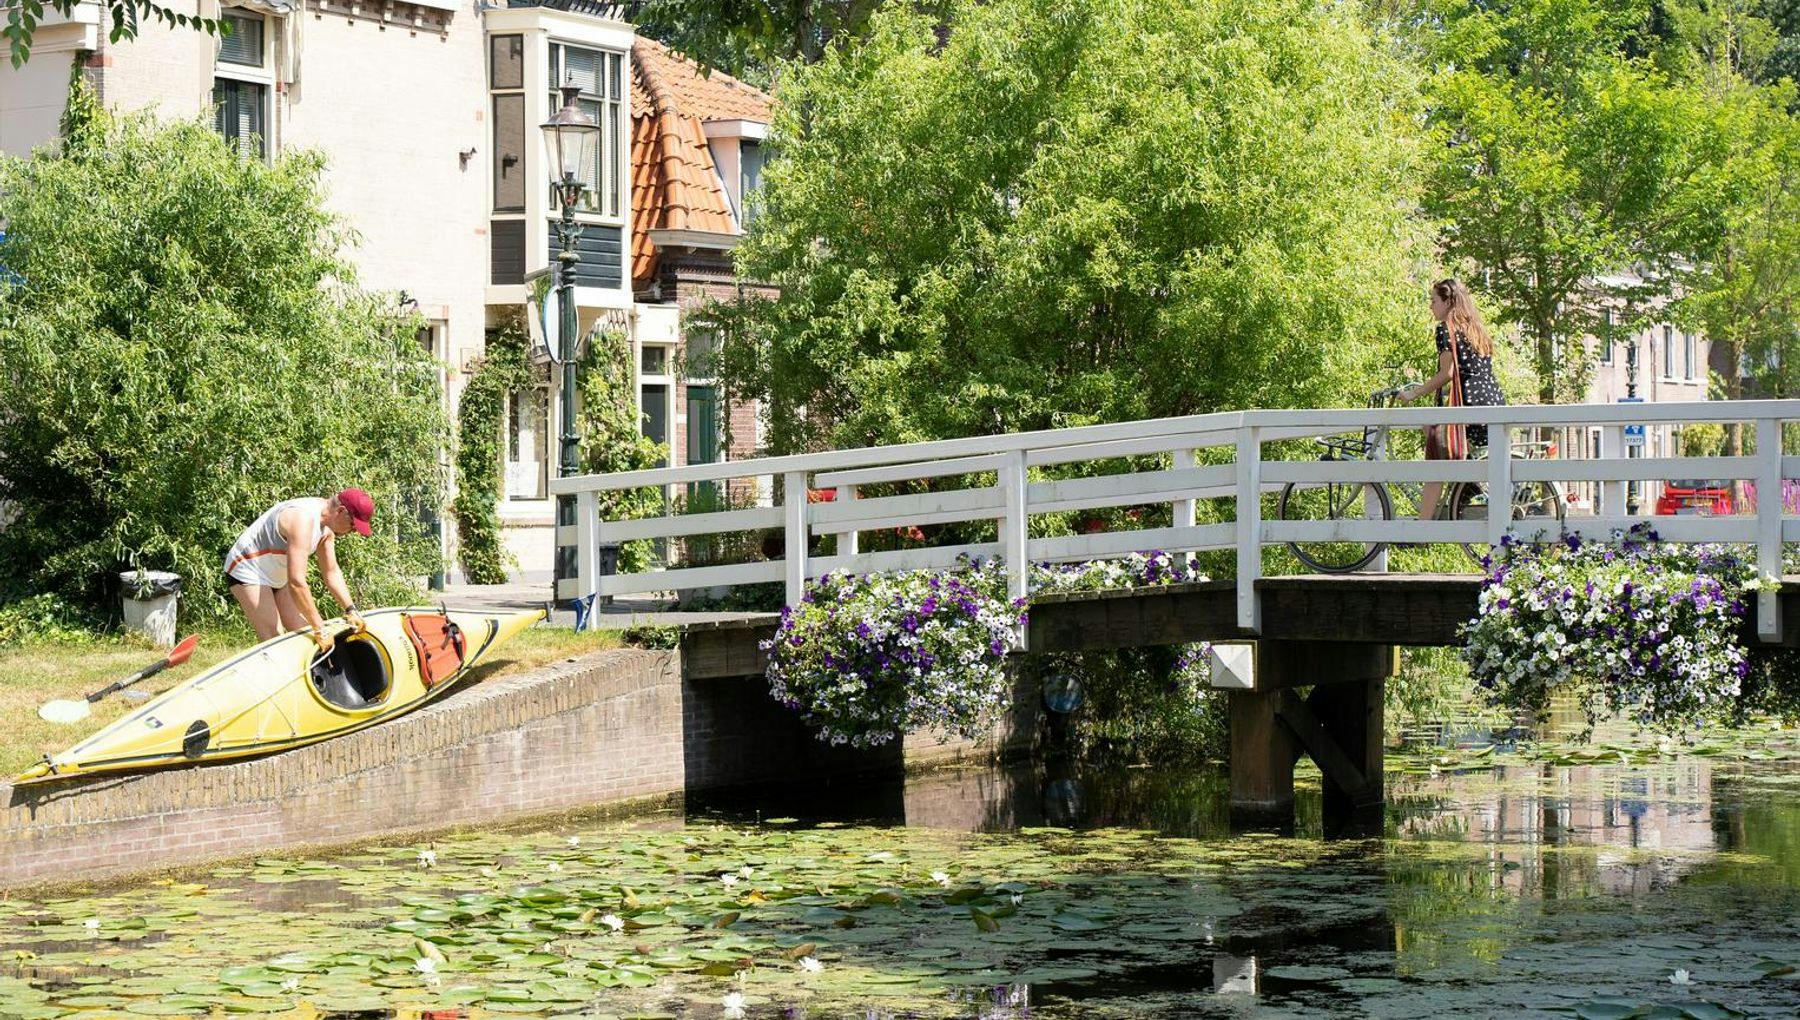 A man puts his canoe in the water at canal Weesp